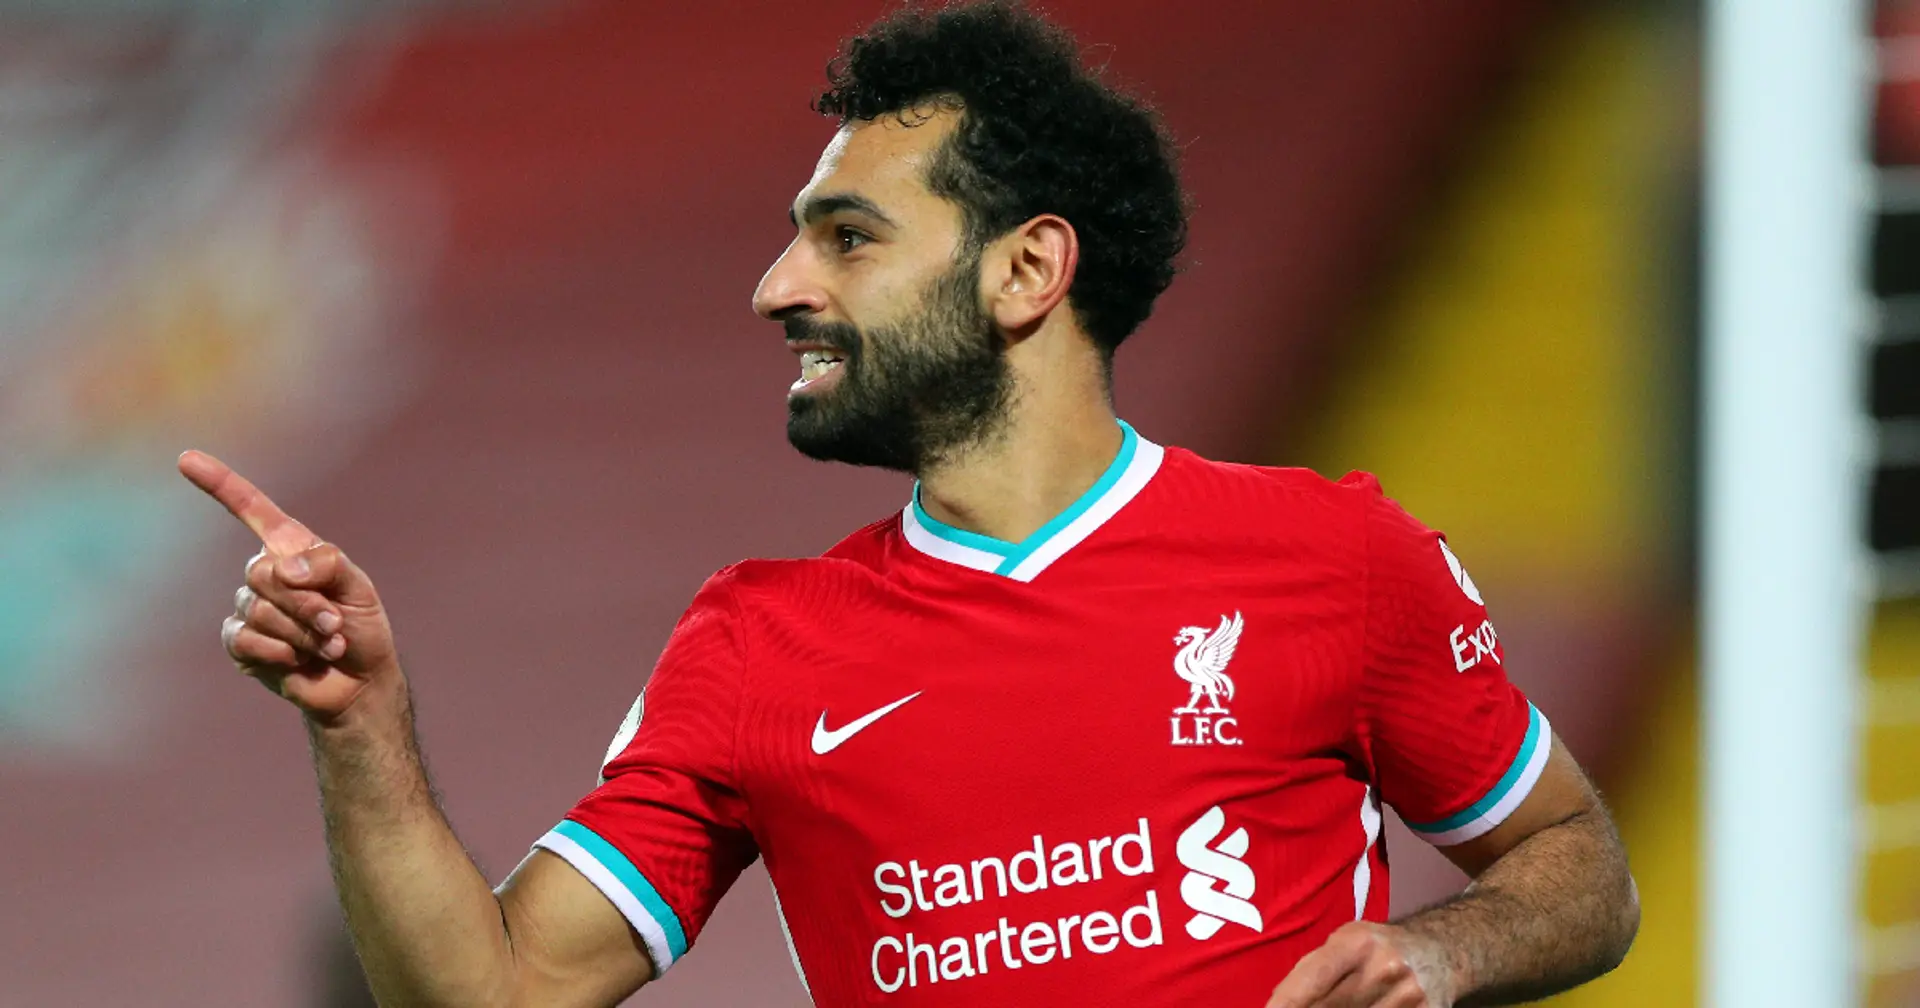 'He will be licking his lips': Ex-PL player Clinton Morrison on why Leicester game will excite Salah